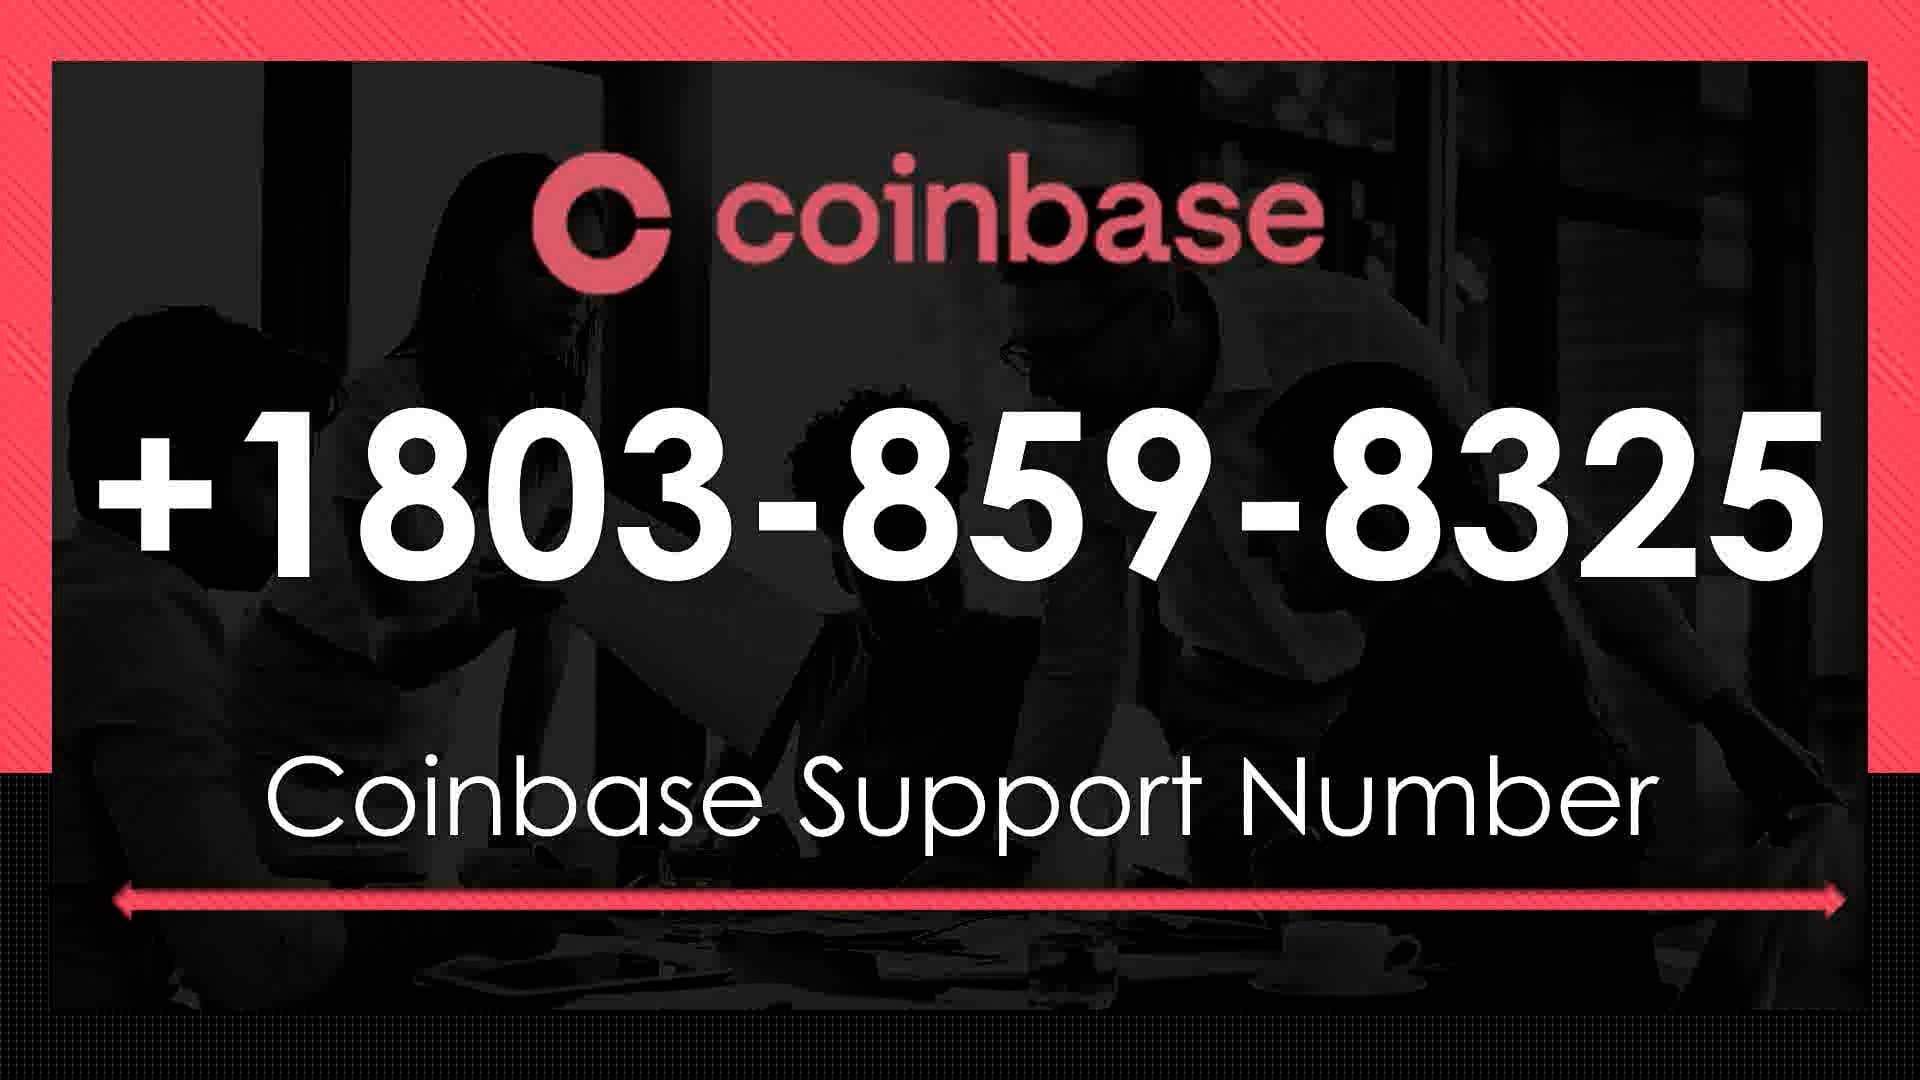 Coinbase Supp0rt Number +1+803+859+8325+ D21$ (17) on Vimeo